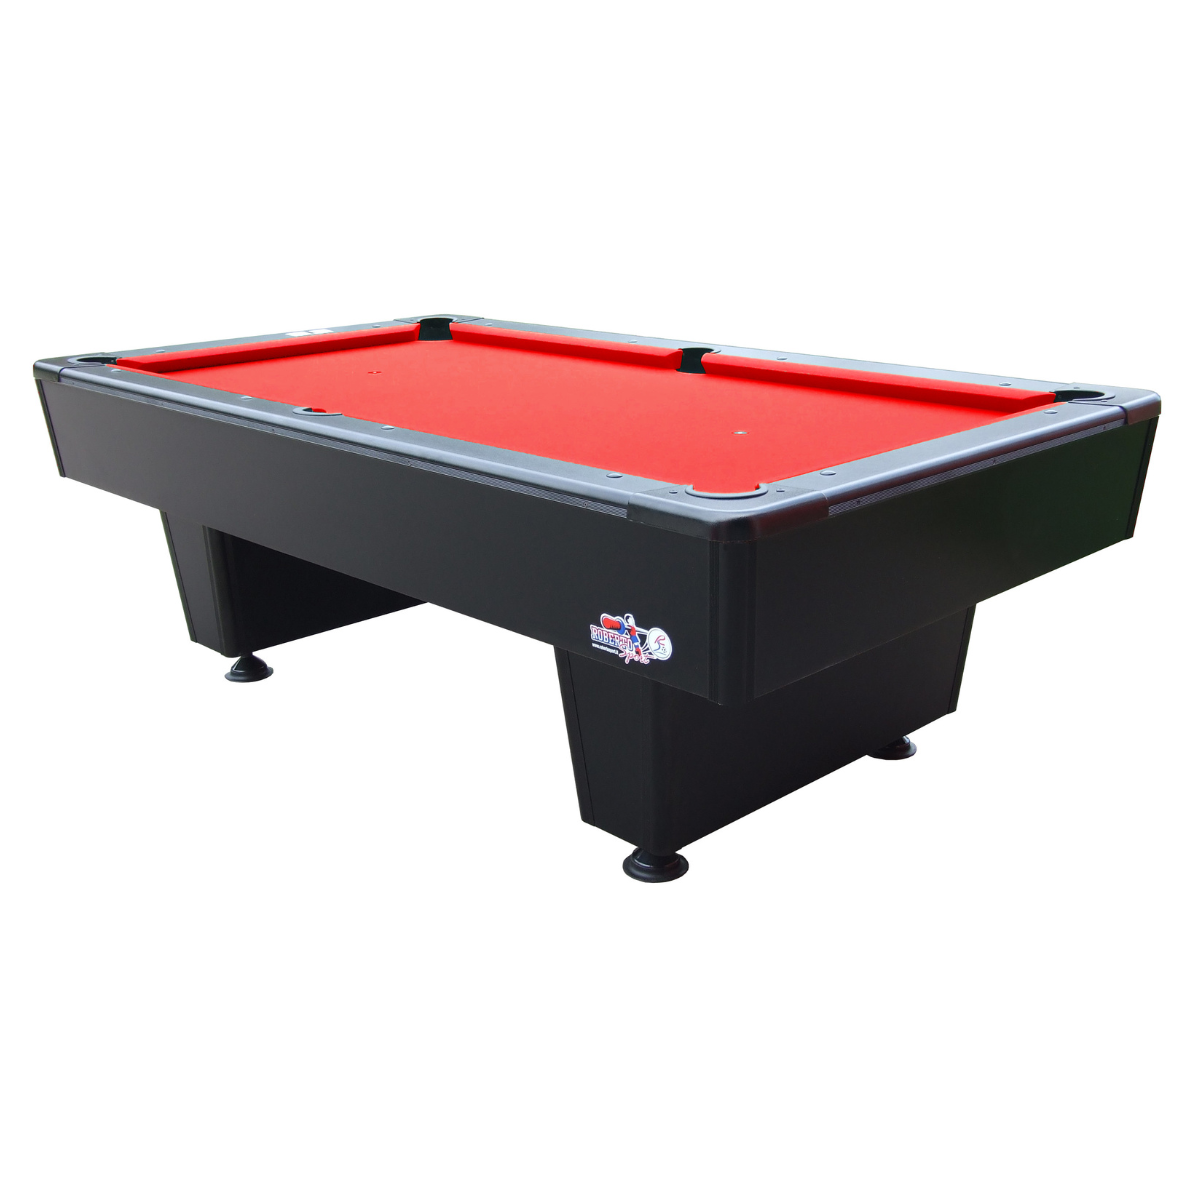 The Roberto First Pool 8ft American Pool Table